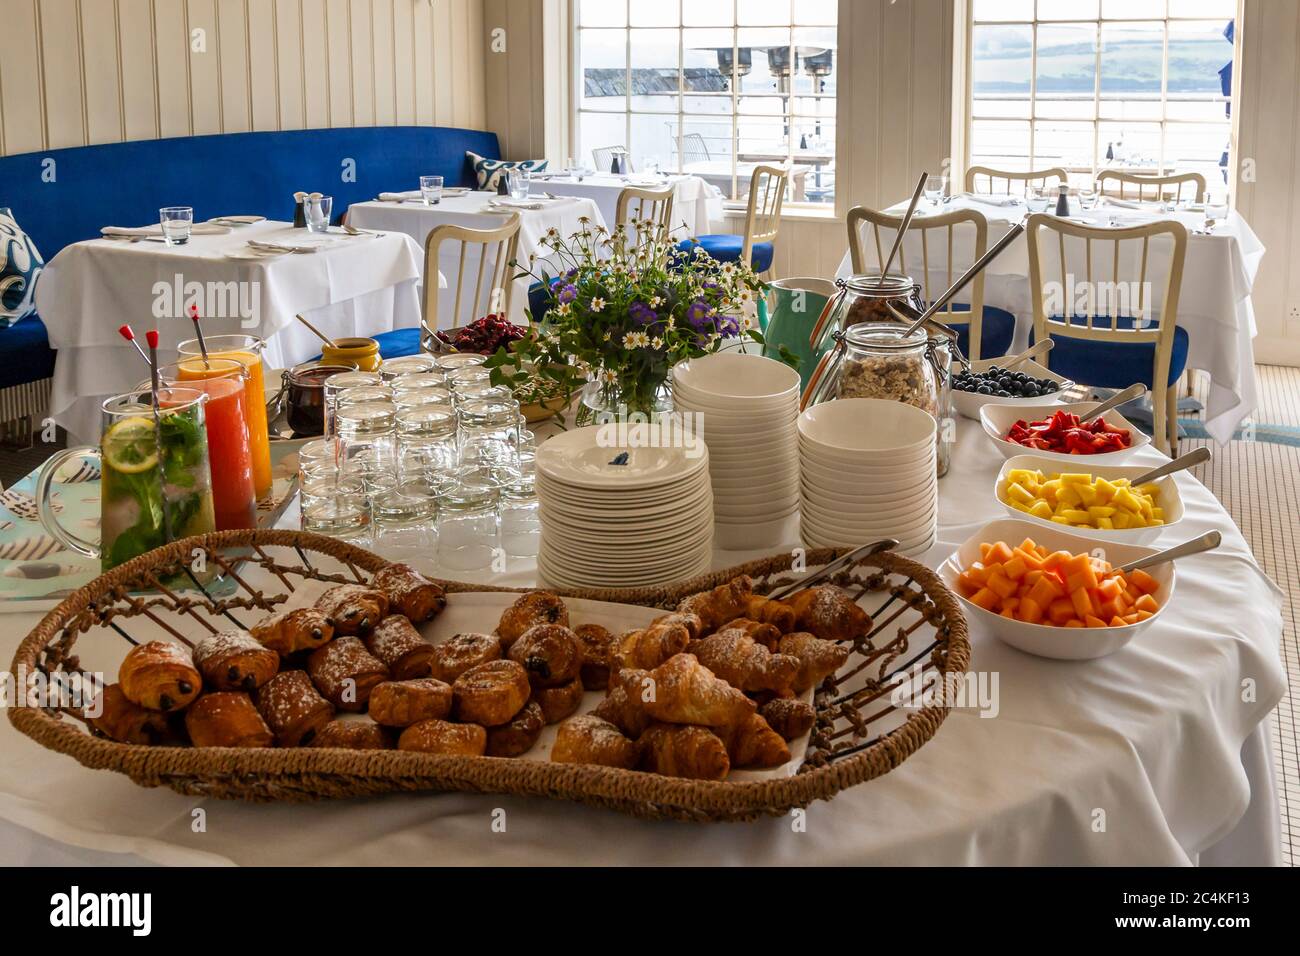 In the Hotel Tresanton Freshness is also a top priority at breakfast! Perfect start to the day by the sea. Cornwall, England Stock Photo